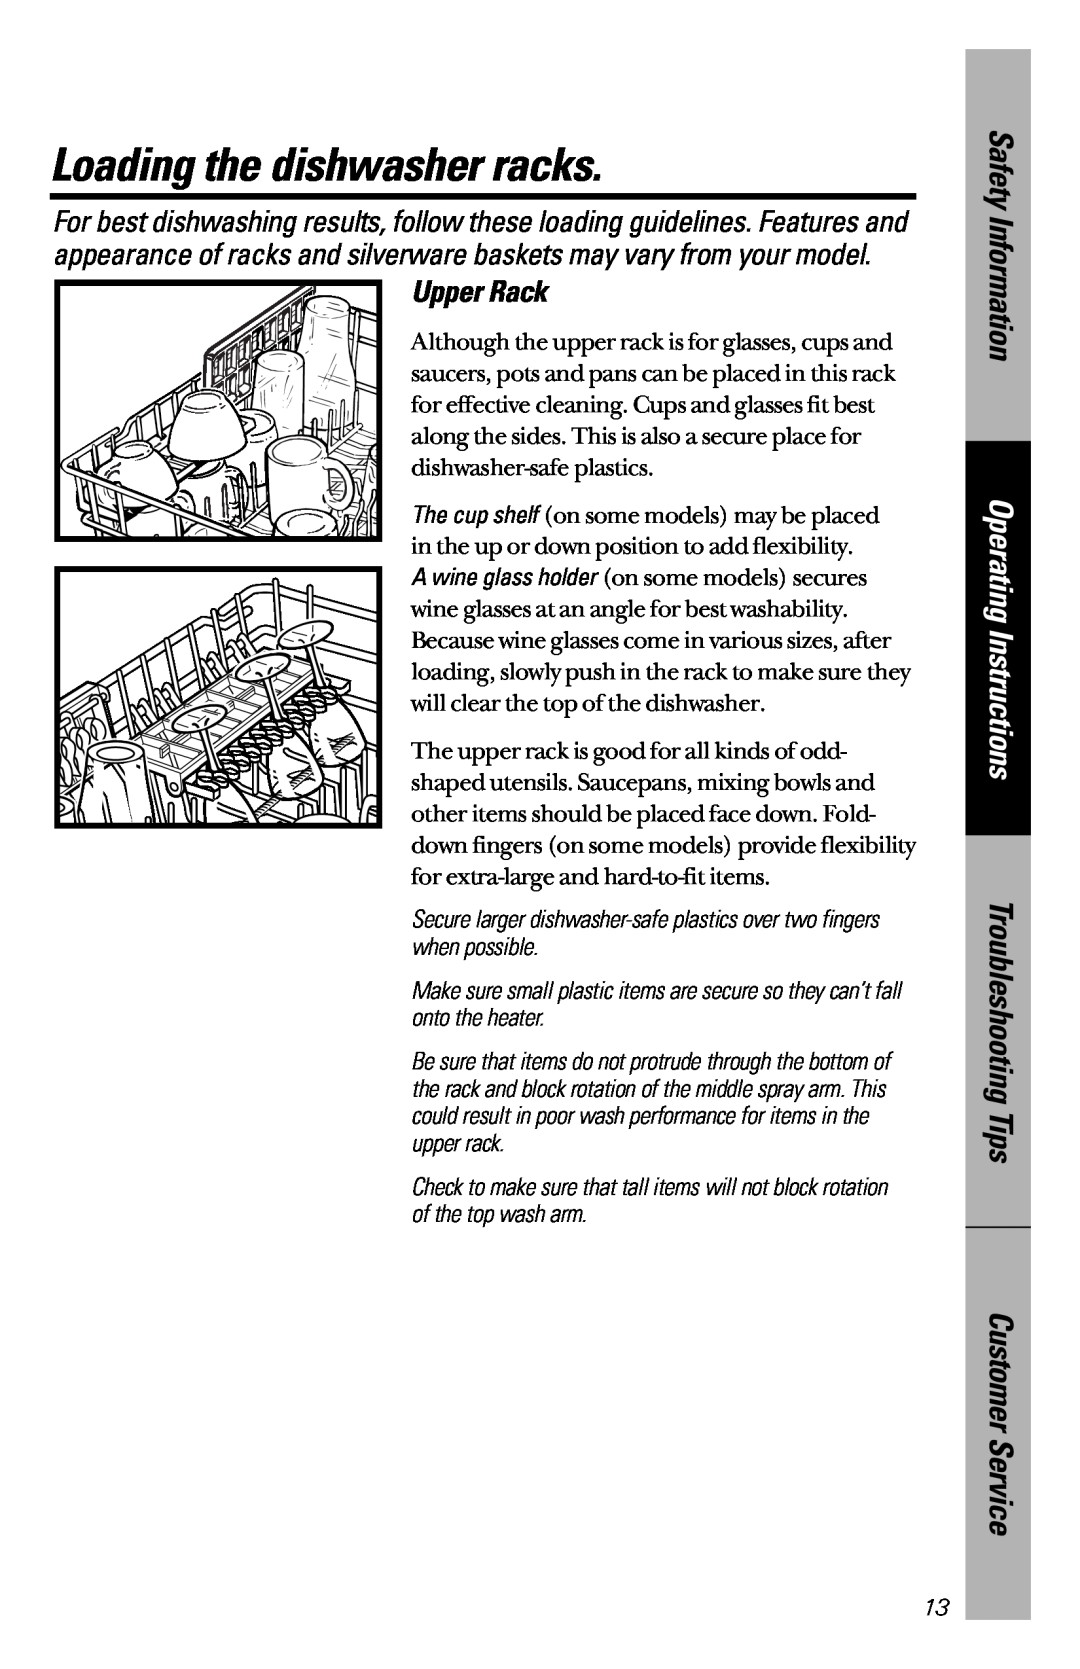 GE GSDL122, GSDL132, GSD5330, GSD5350 Loading the dishwasher racks, Upper Rack, Safety Information, Operating Instructions 